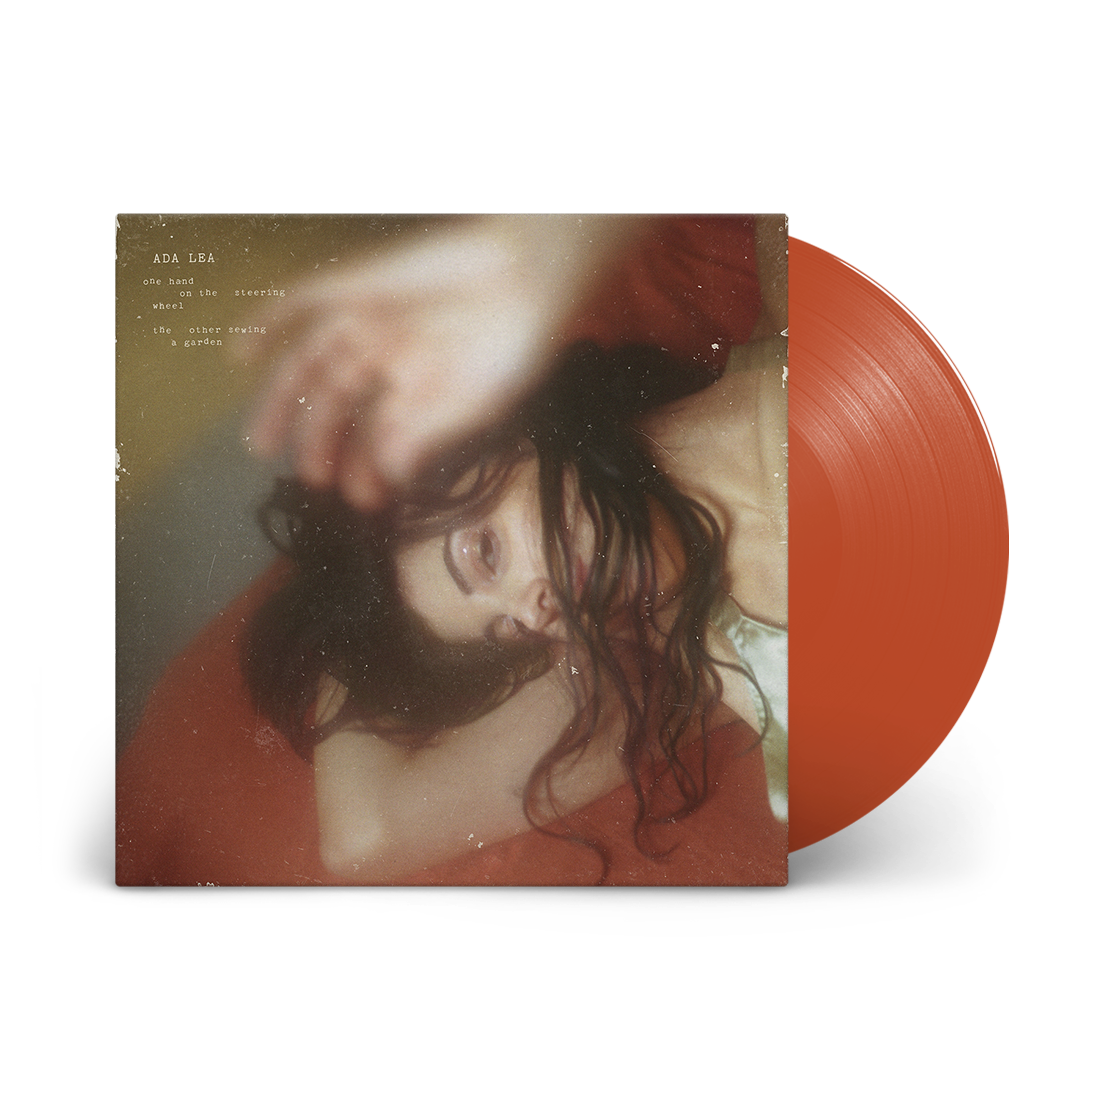 One Hand On The Steering Wheel The Other Sewing A Garden: Limited Transparent Red Vinyl LP